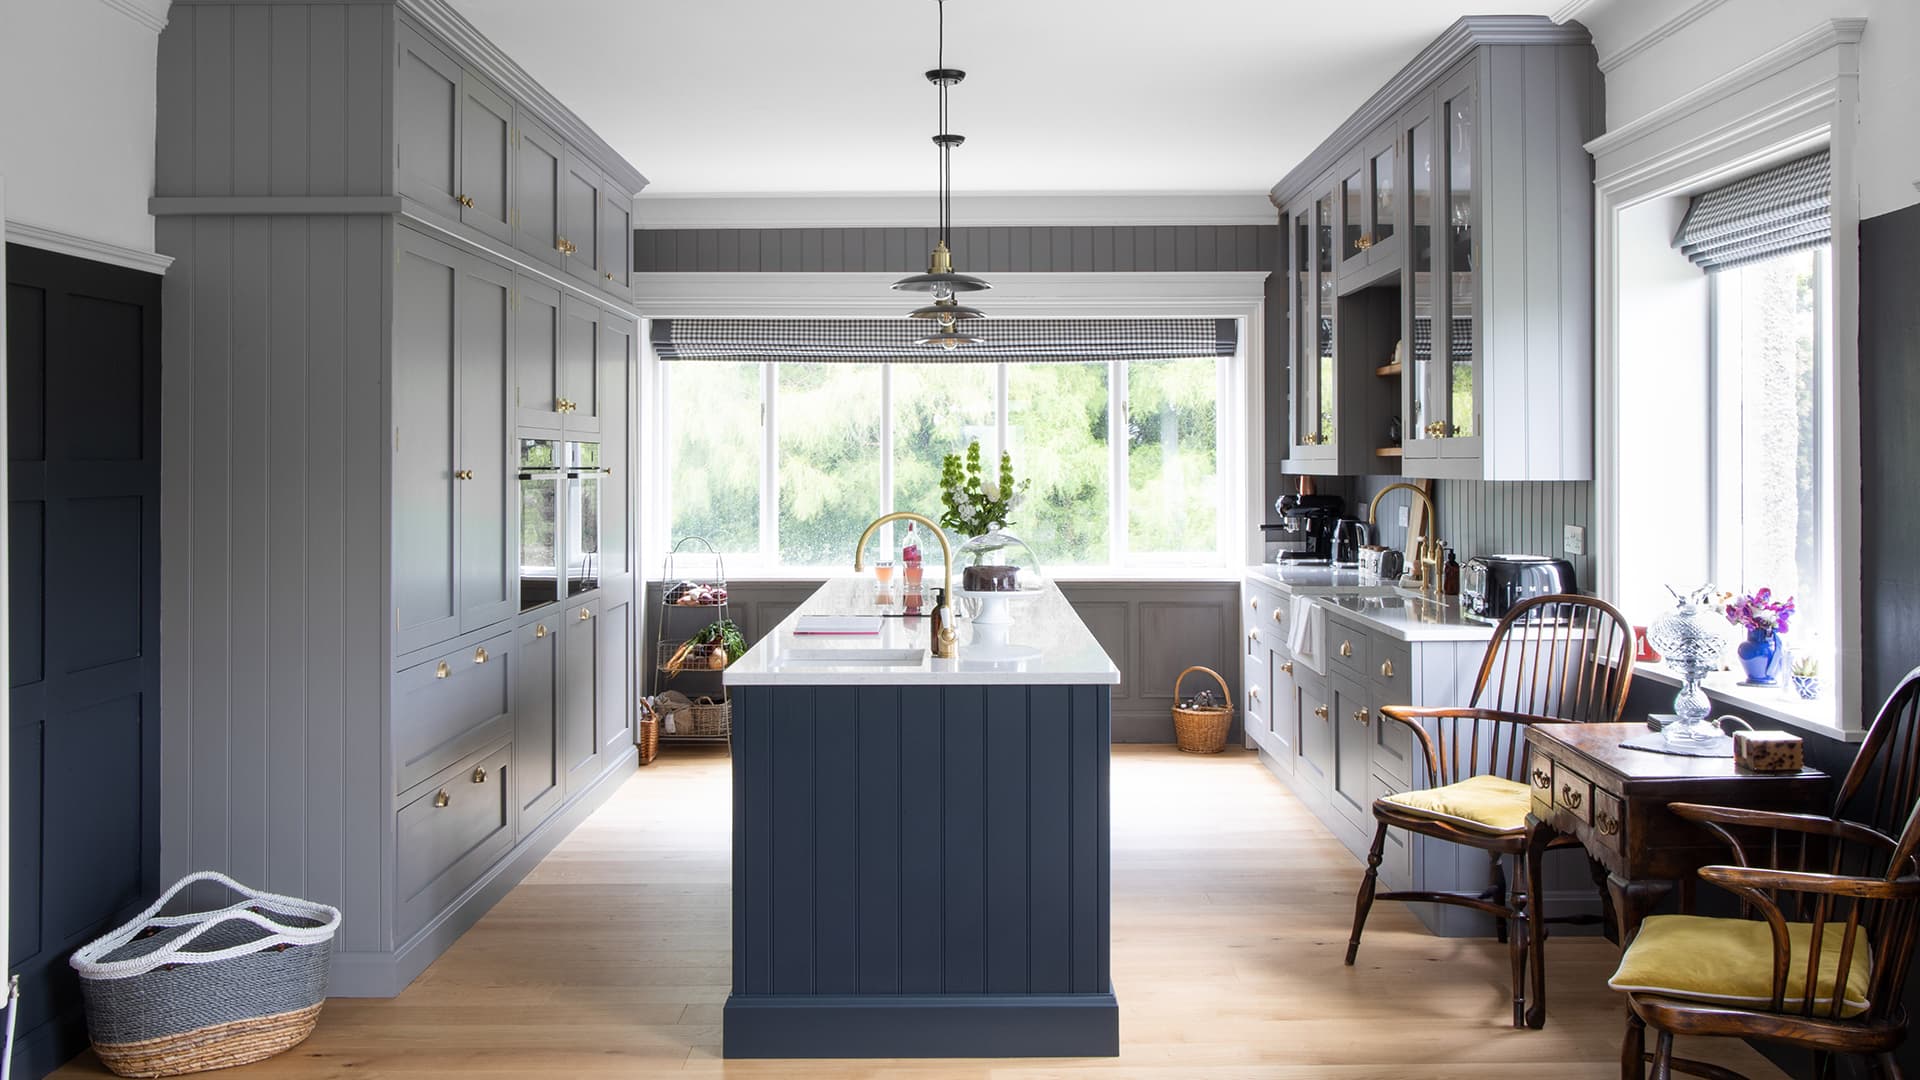 Room view of a kitchen with grey fittings and navy kitchen island